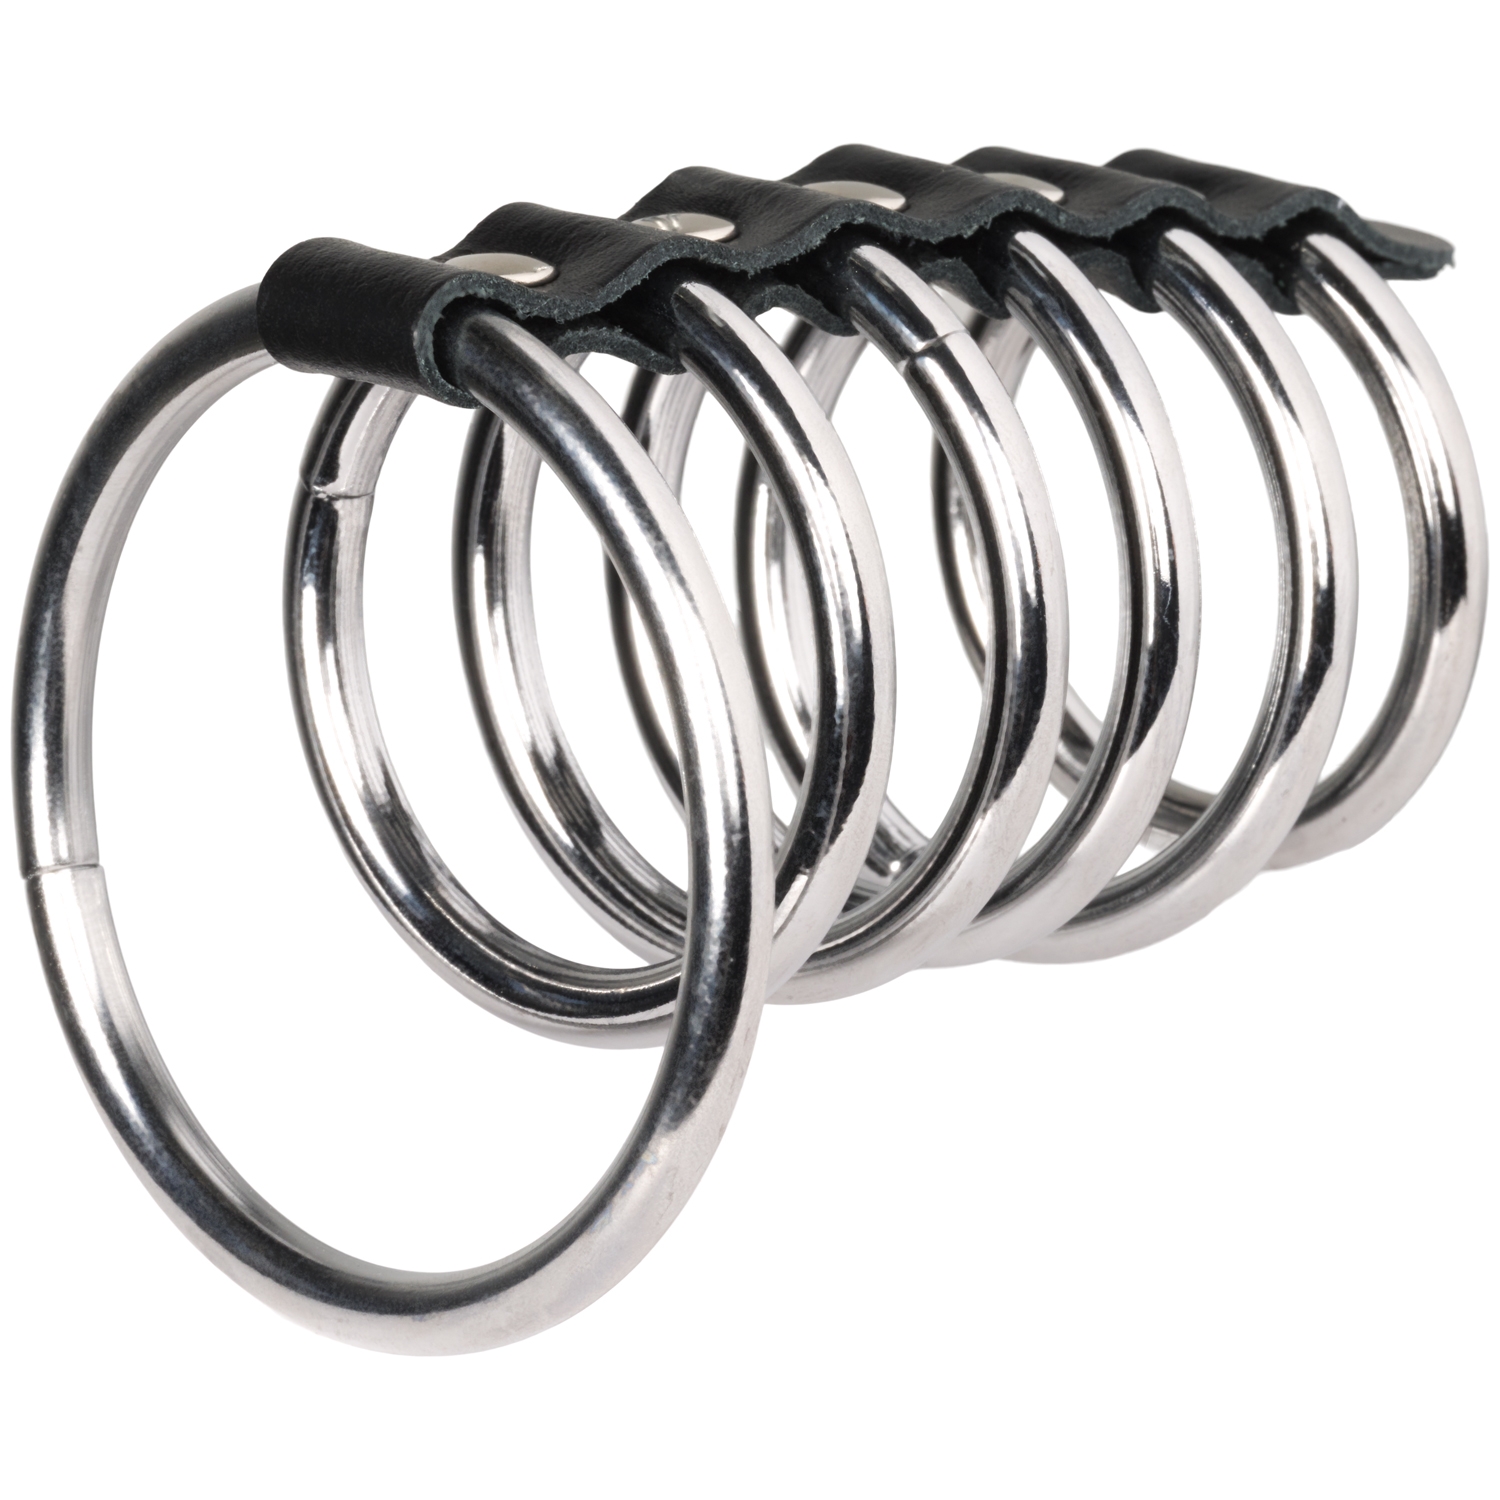 26327-rimba-metal-cockrings-tube-with-ball-ring_01_product_q100